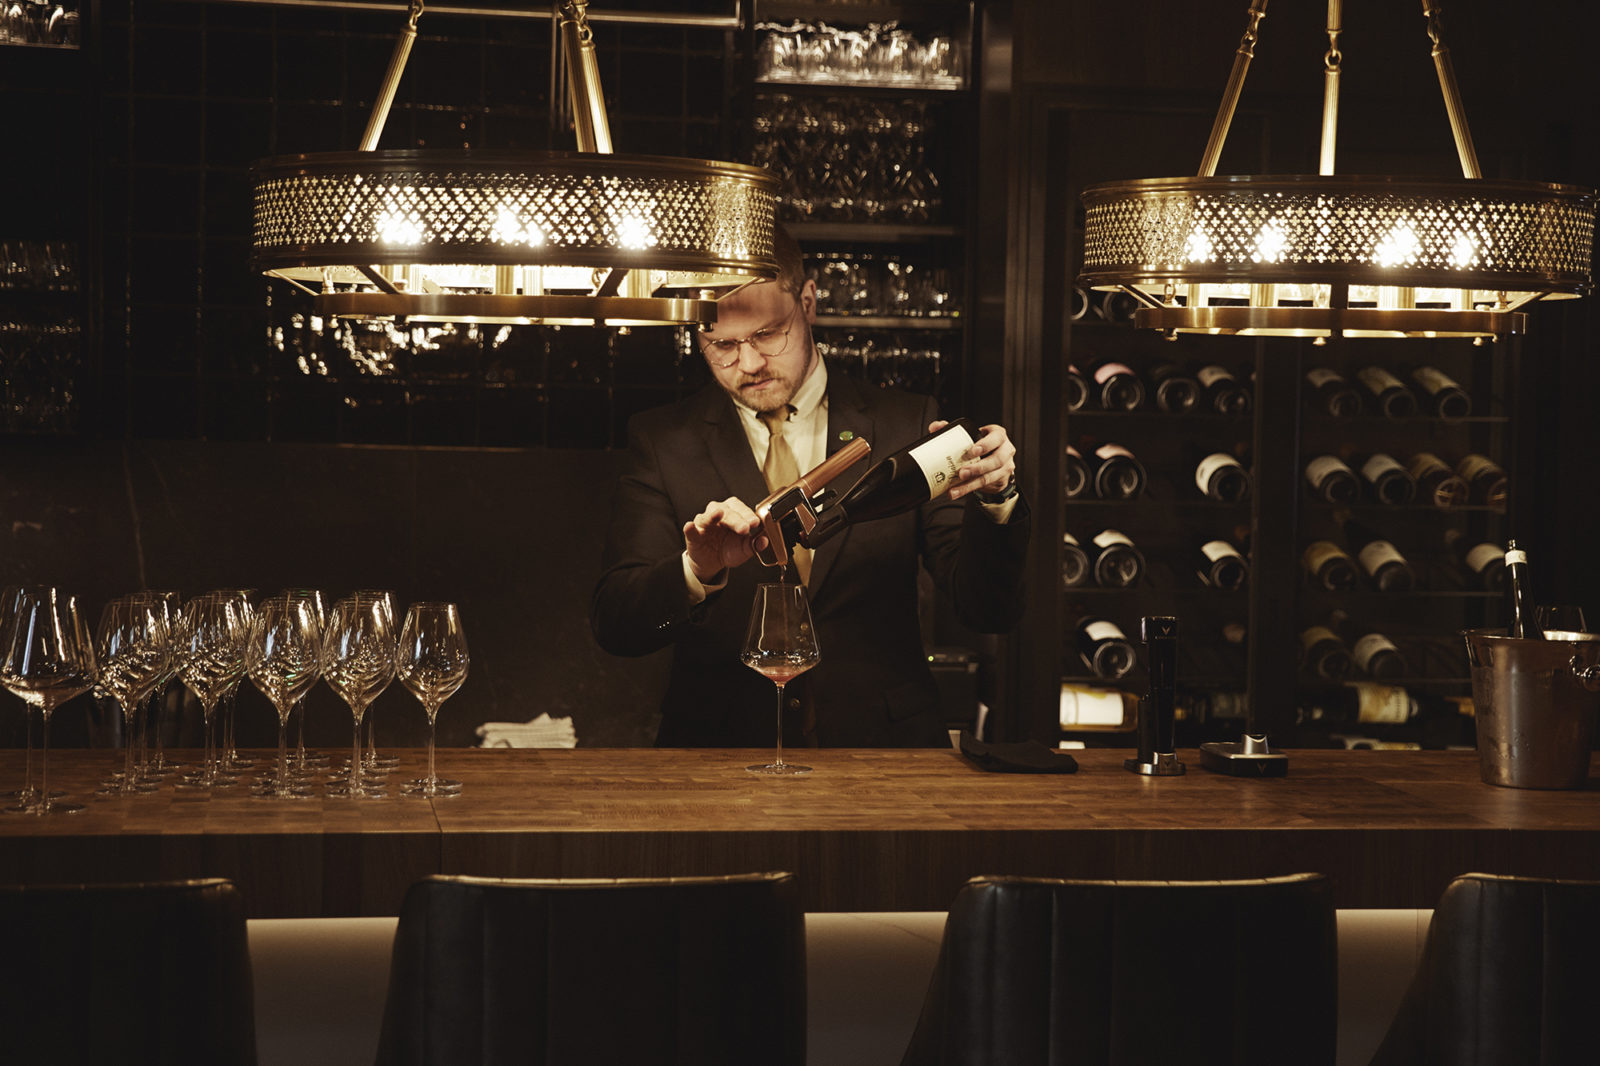 Waiter serving red wine in a glass at the wine cellar